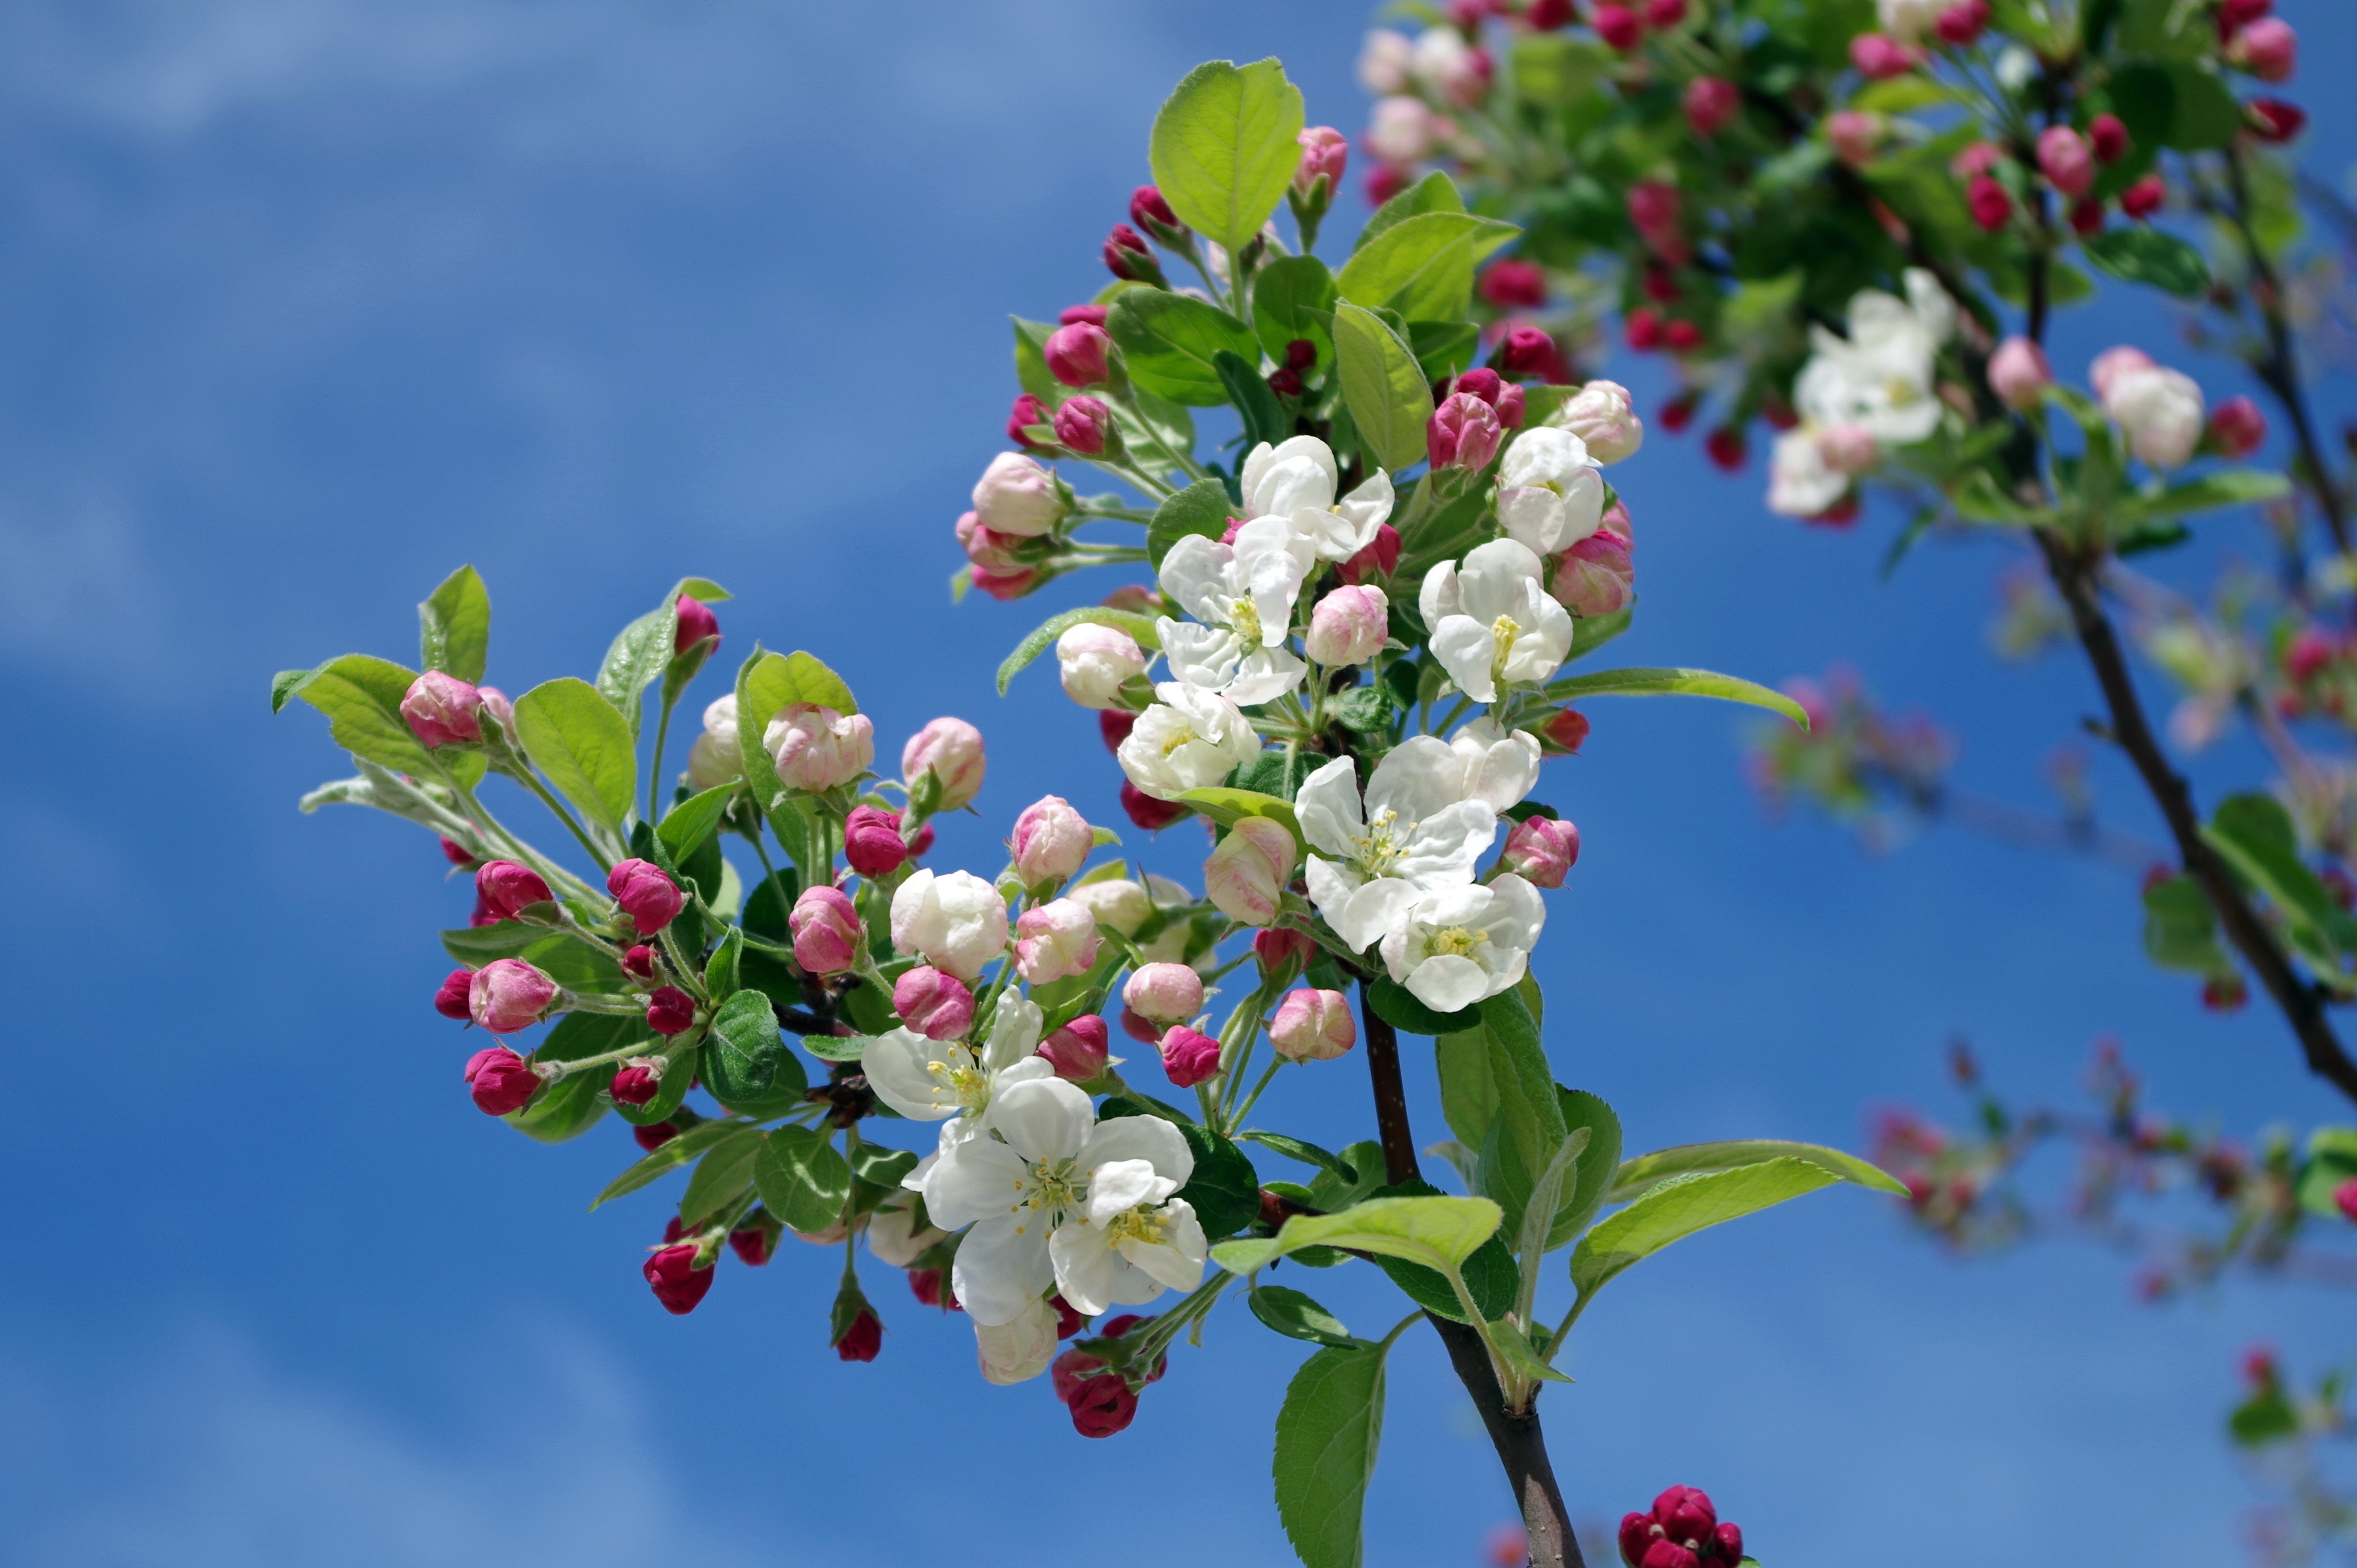 White Flowers on Black Tree Branch Under Sky during Daytime, Apple blossom, Bloom, Blooms, Blossoms, HQ Photo